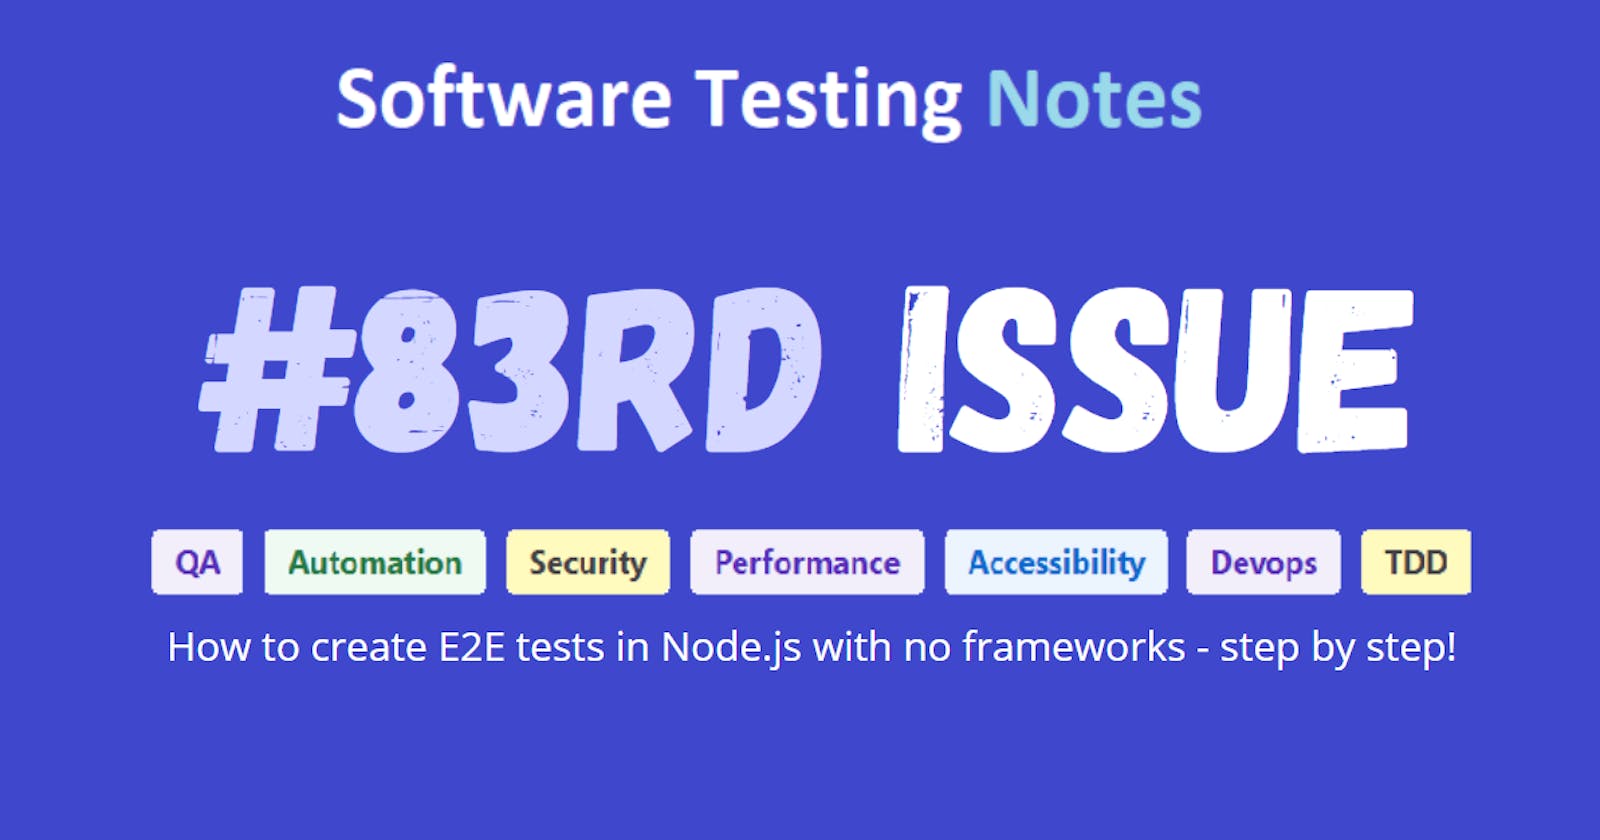 Why use that ___ fancy new framework to automate your end to end testing when you can just use NodeJS